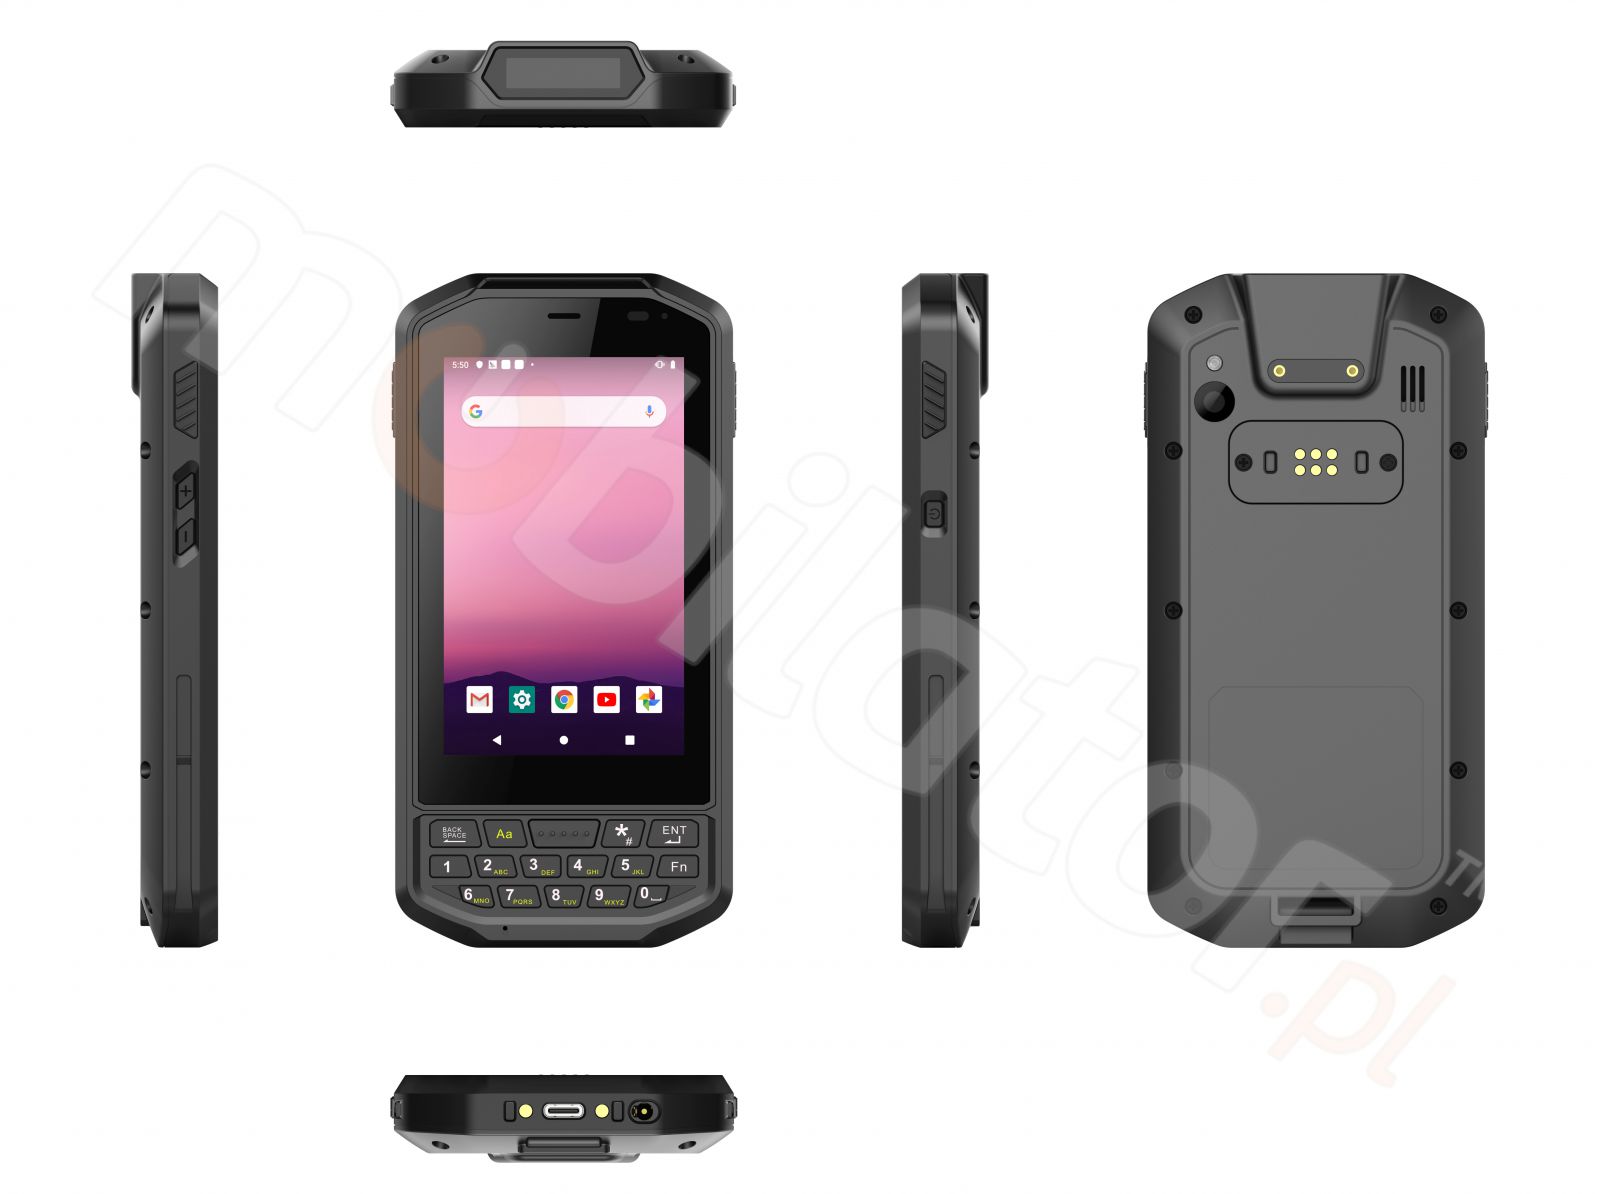 Waterproof data collector (IP65 + MIL-STD-810G) with octa-core processor, 4GB RAM, 64GB disk and a Zebra 4710 2D barcode scanner and UHF RFID - Mobipad Qxtron 4100 v.5 